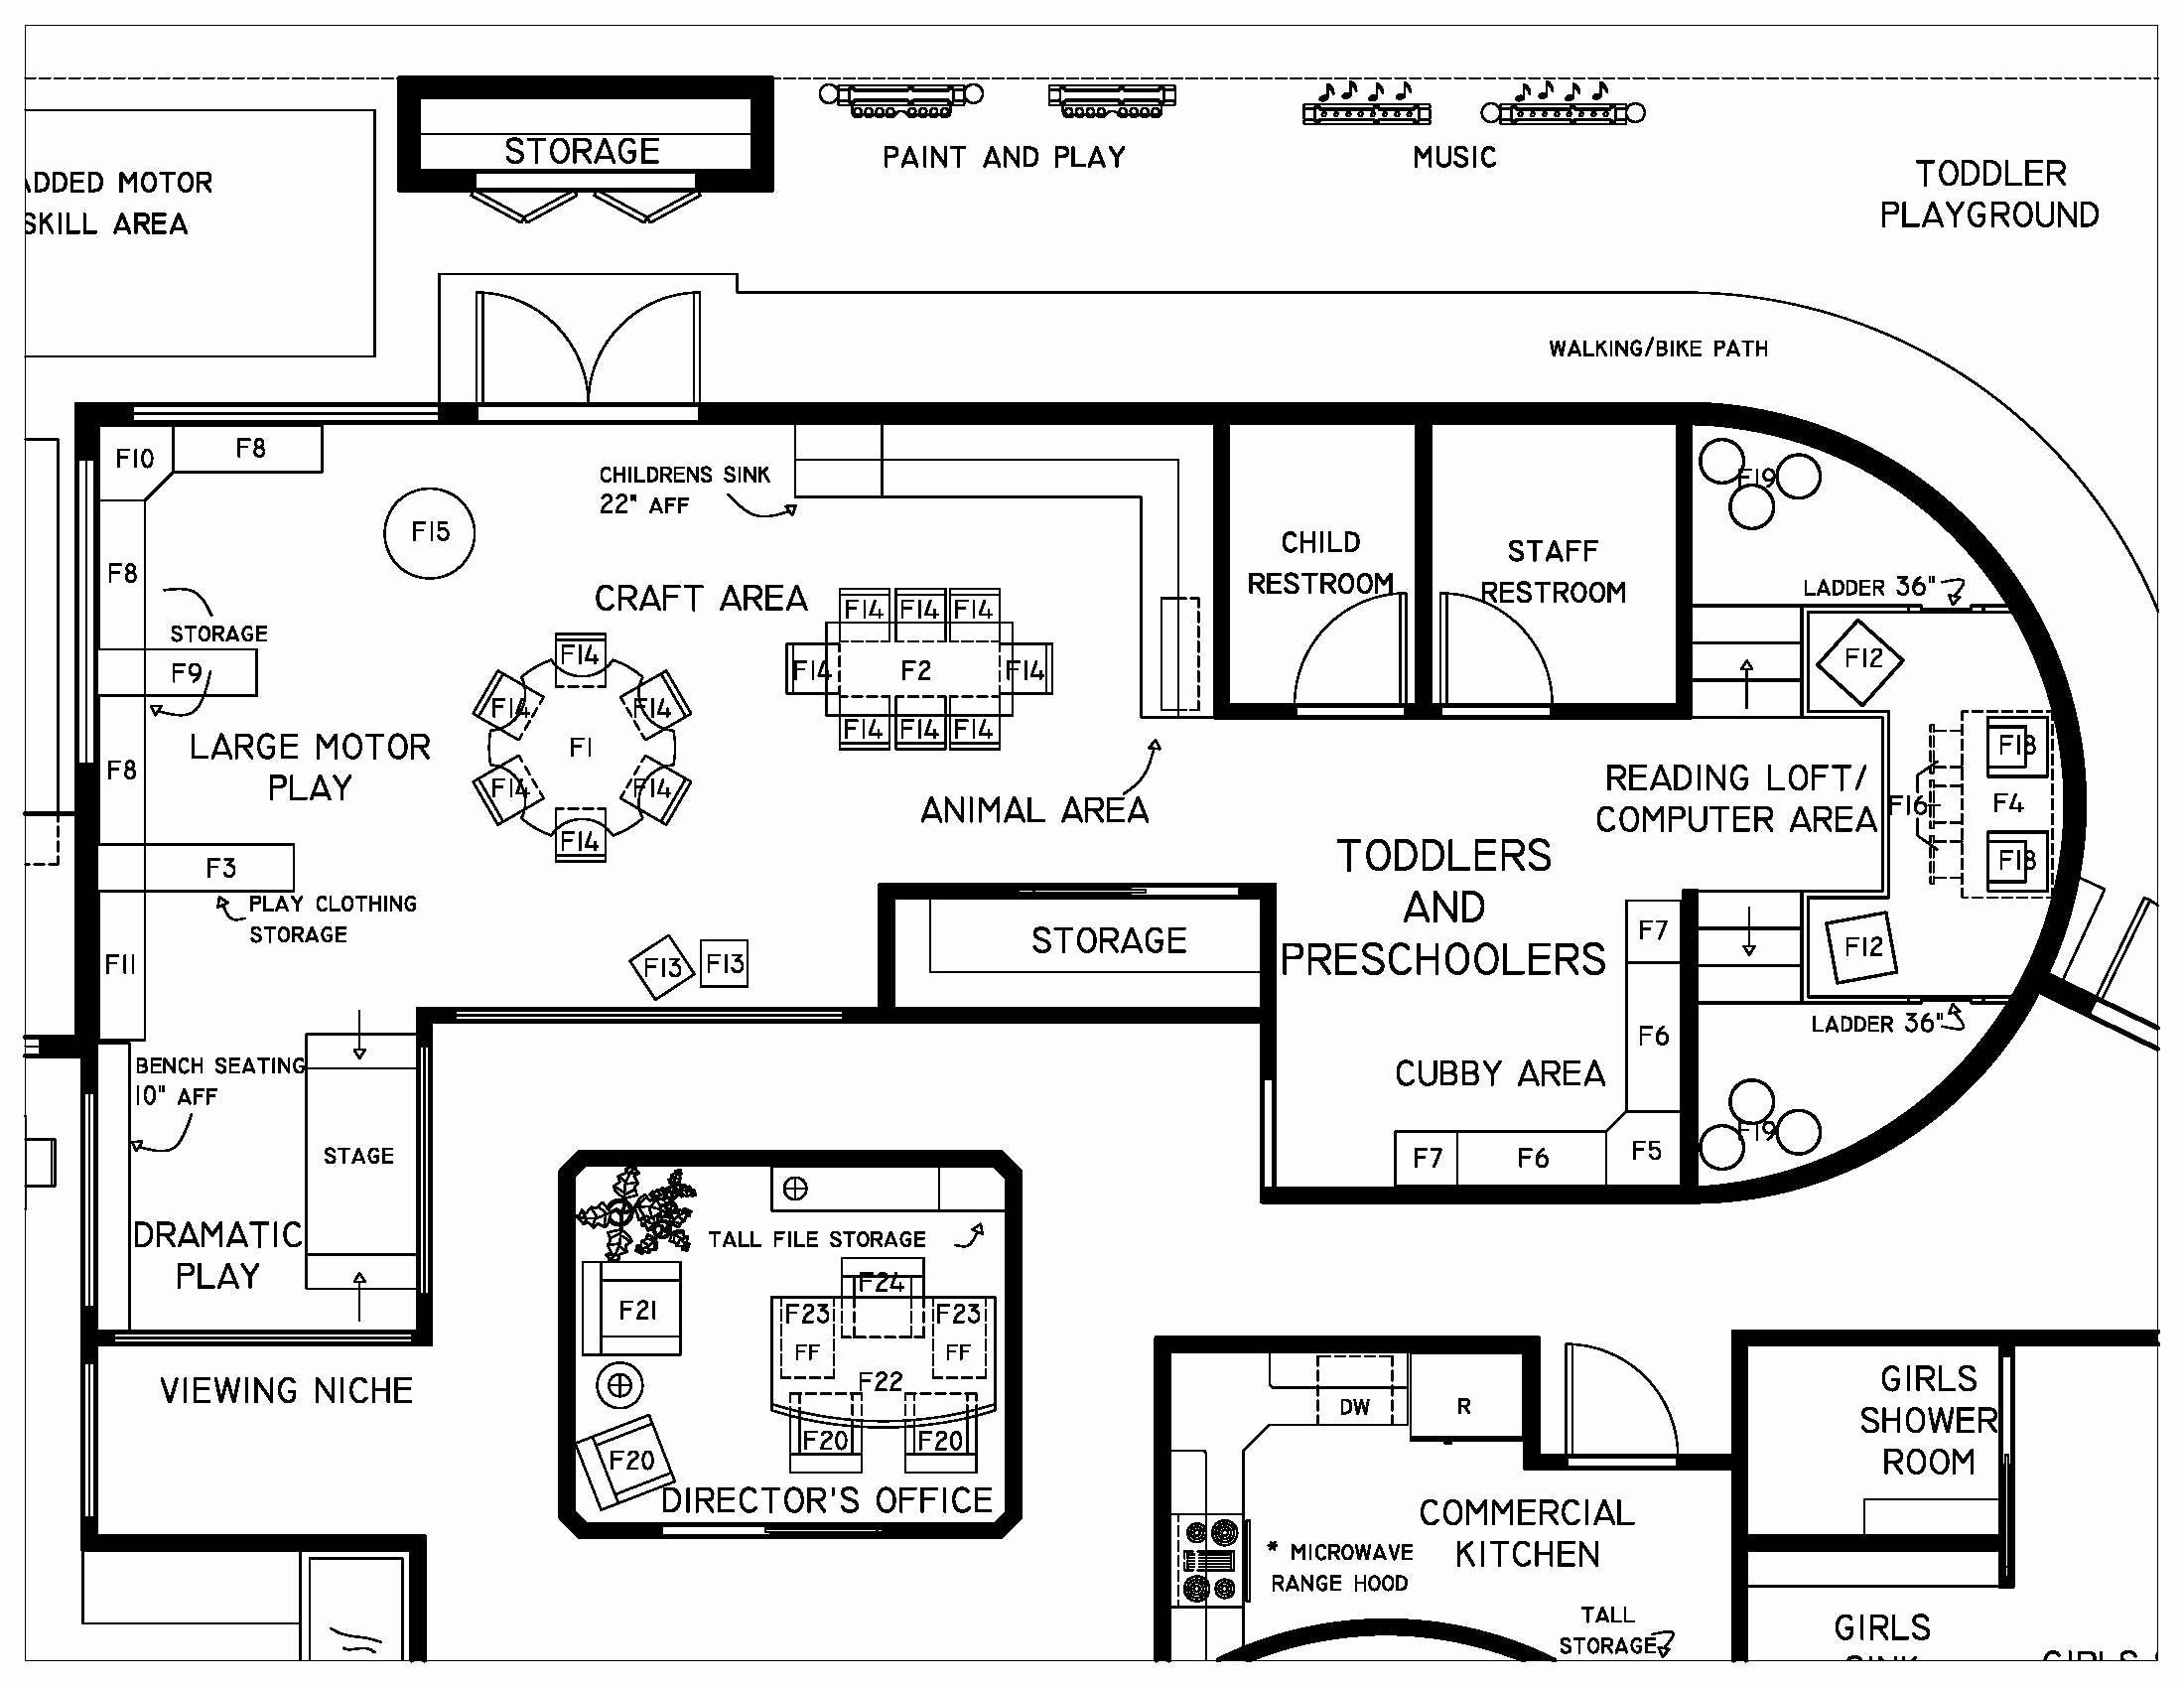 Wiring Diagram for Home Refrence Drawing A Wiring Diagram software Refrence Floor Plan Mansion Floor